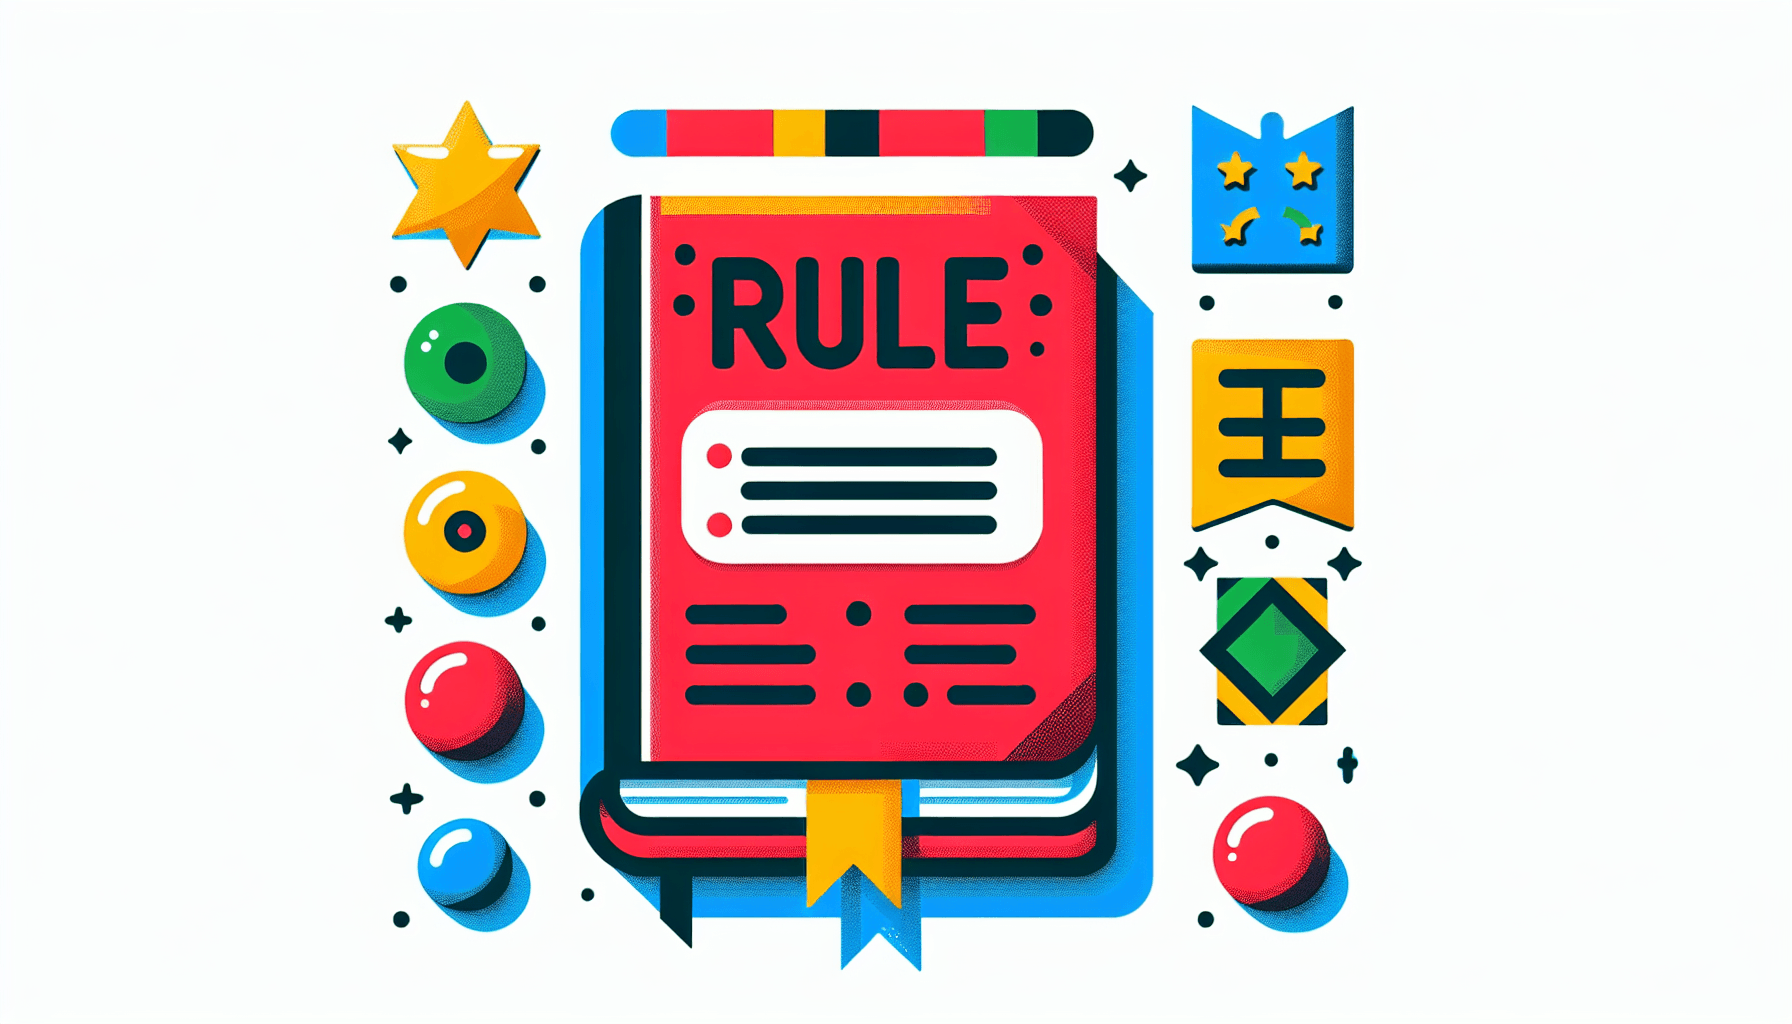 Rulebook in flat illustration style and white background, red #f47574, green #88c7a8, yellow #fcc44b, and blue #645bc8 colors.